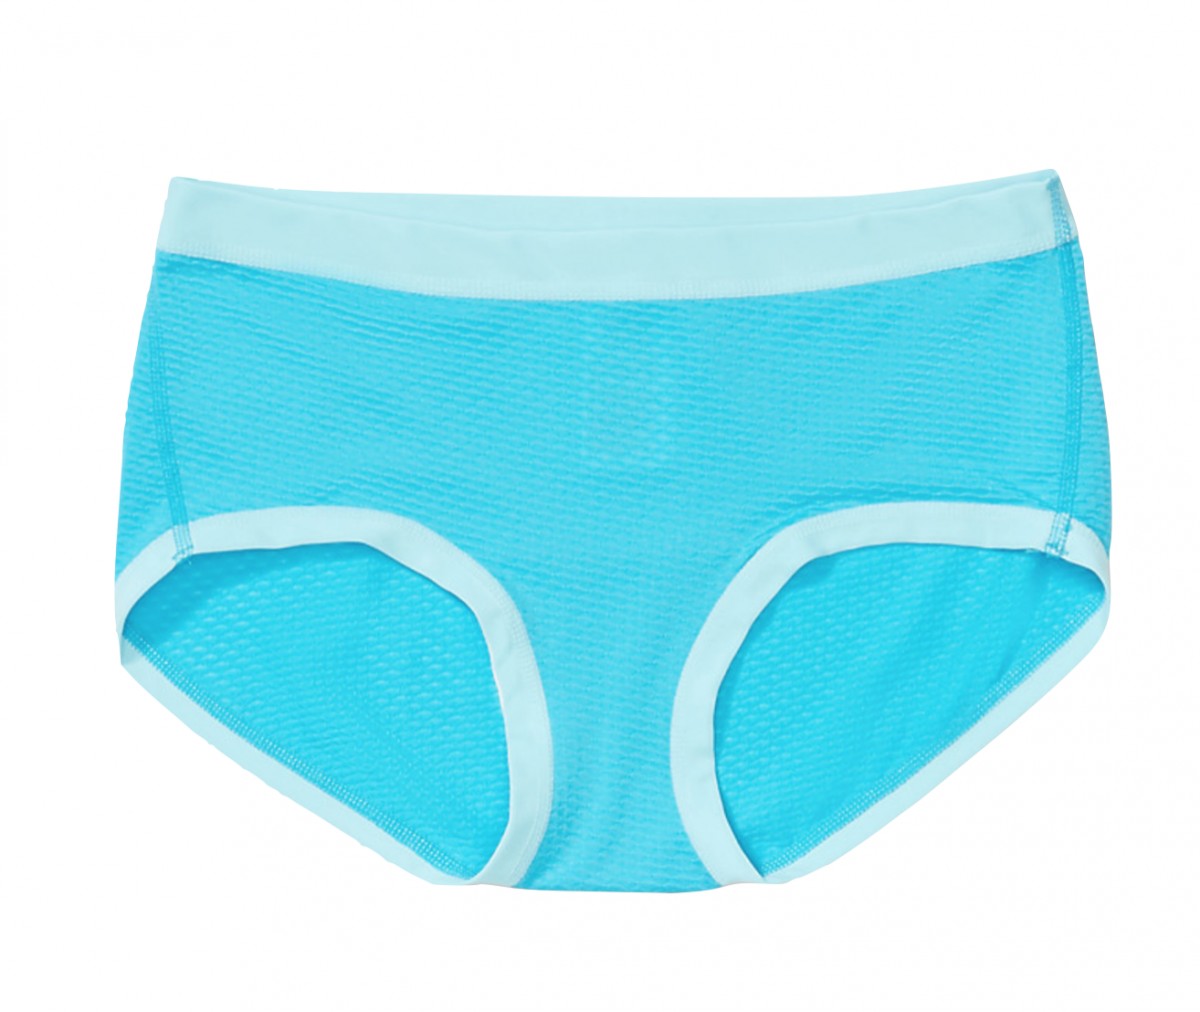 ExOfficio Refreshes and Expands Performance Travel Underwear